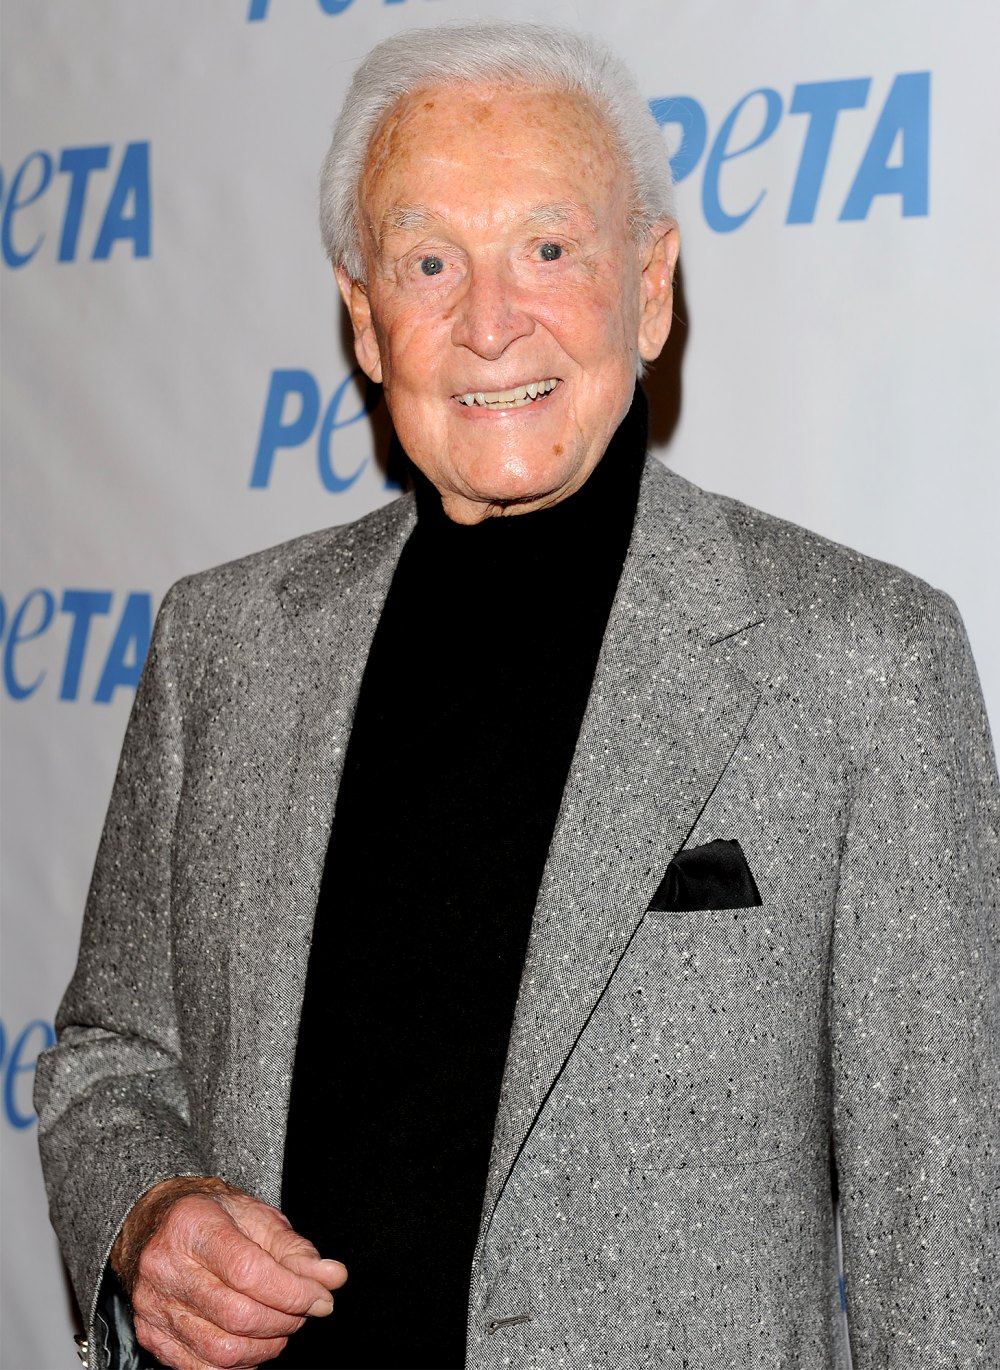 Bob Barker's Cause of Death Revealed: 'The Price Is Right' Host Died of Alzheimer's Disease